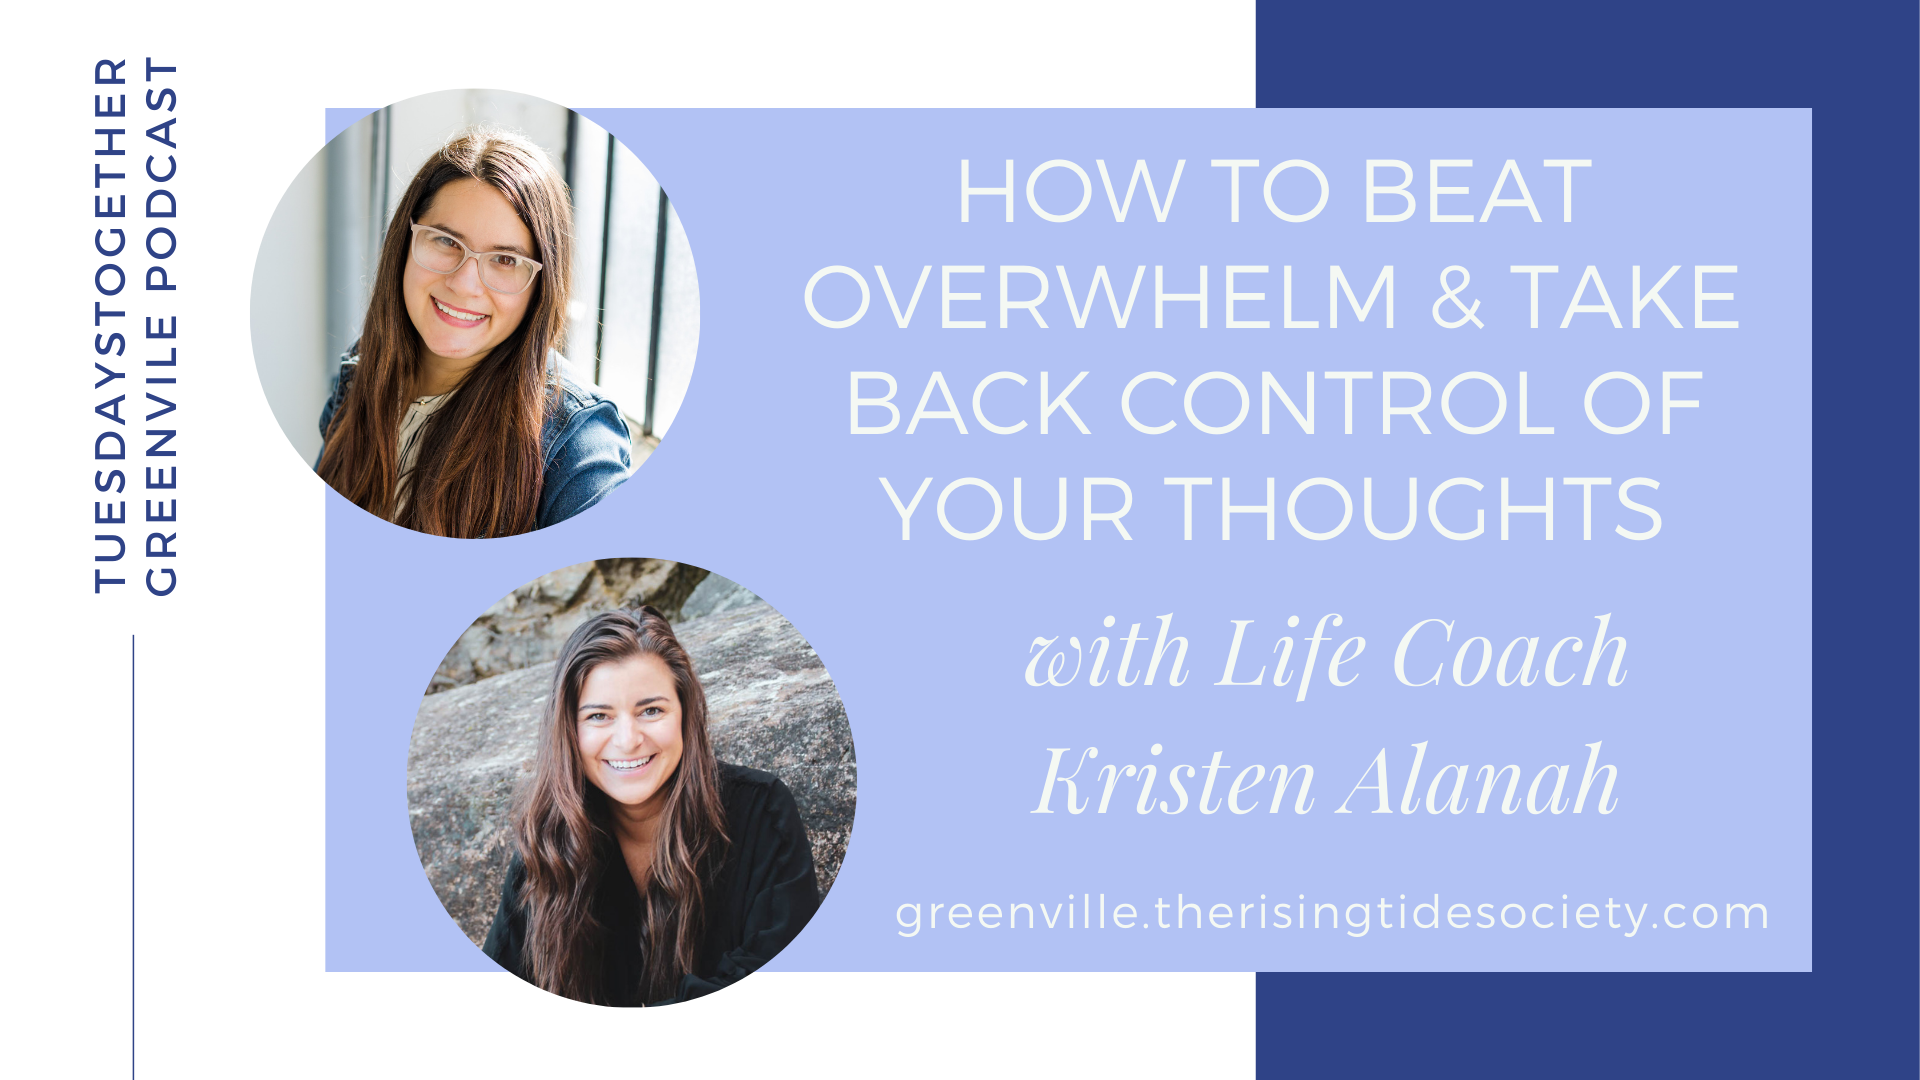 How to Beat Overwhelm & Take Back Control of Your Thoughts